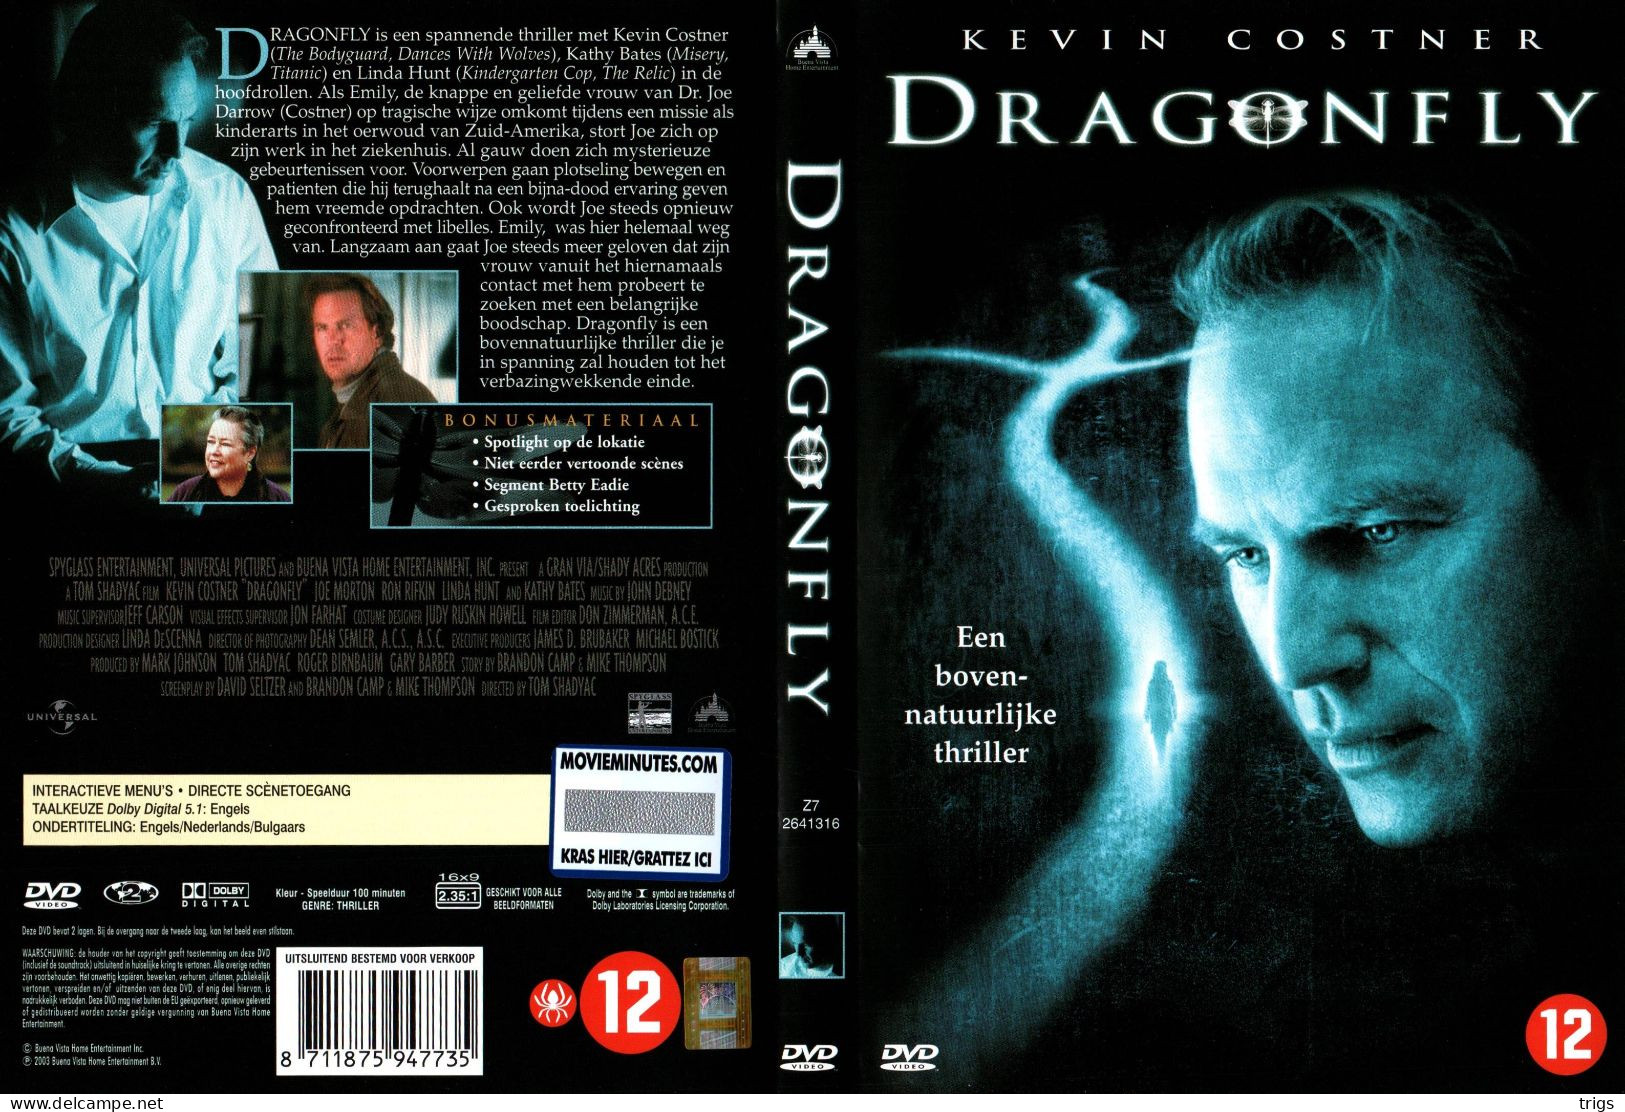 DVD - Dragonfly - Policiers